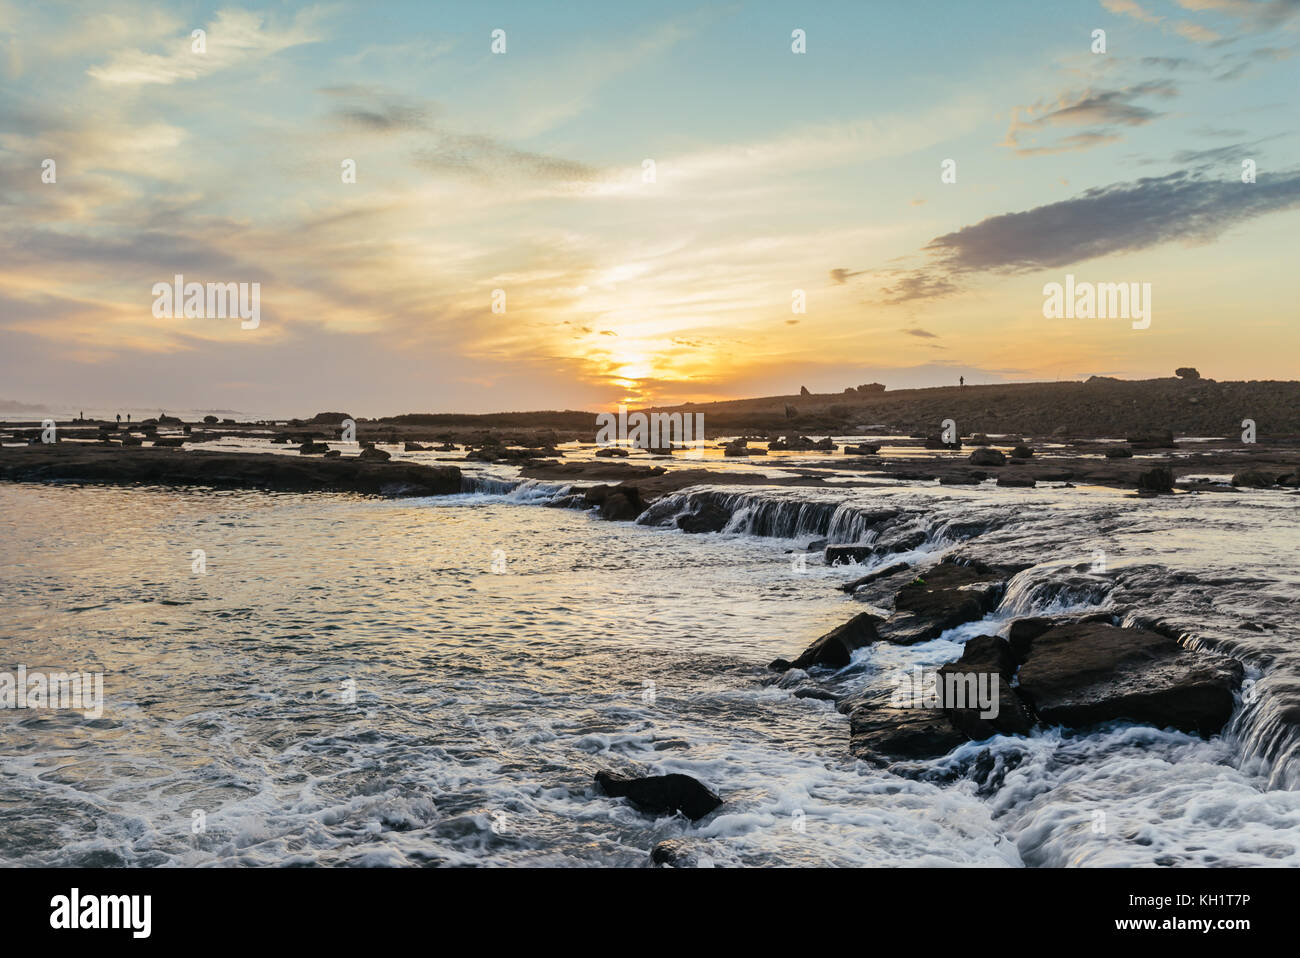 Mini waterfalls in Harhoura, Rabat, Morocco at sunset. View of the rocks and the sea from inside the waters Stock Photo